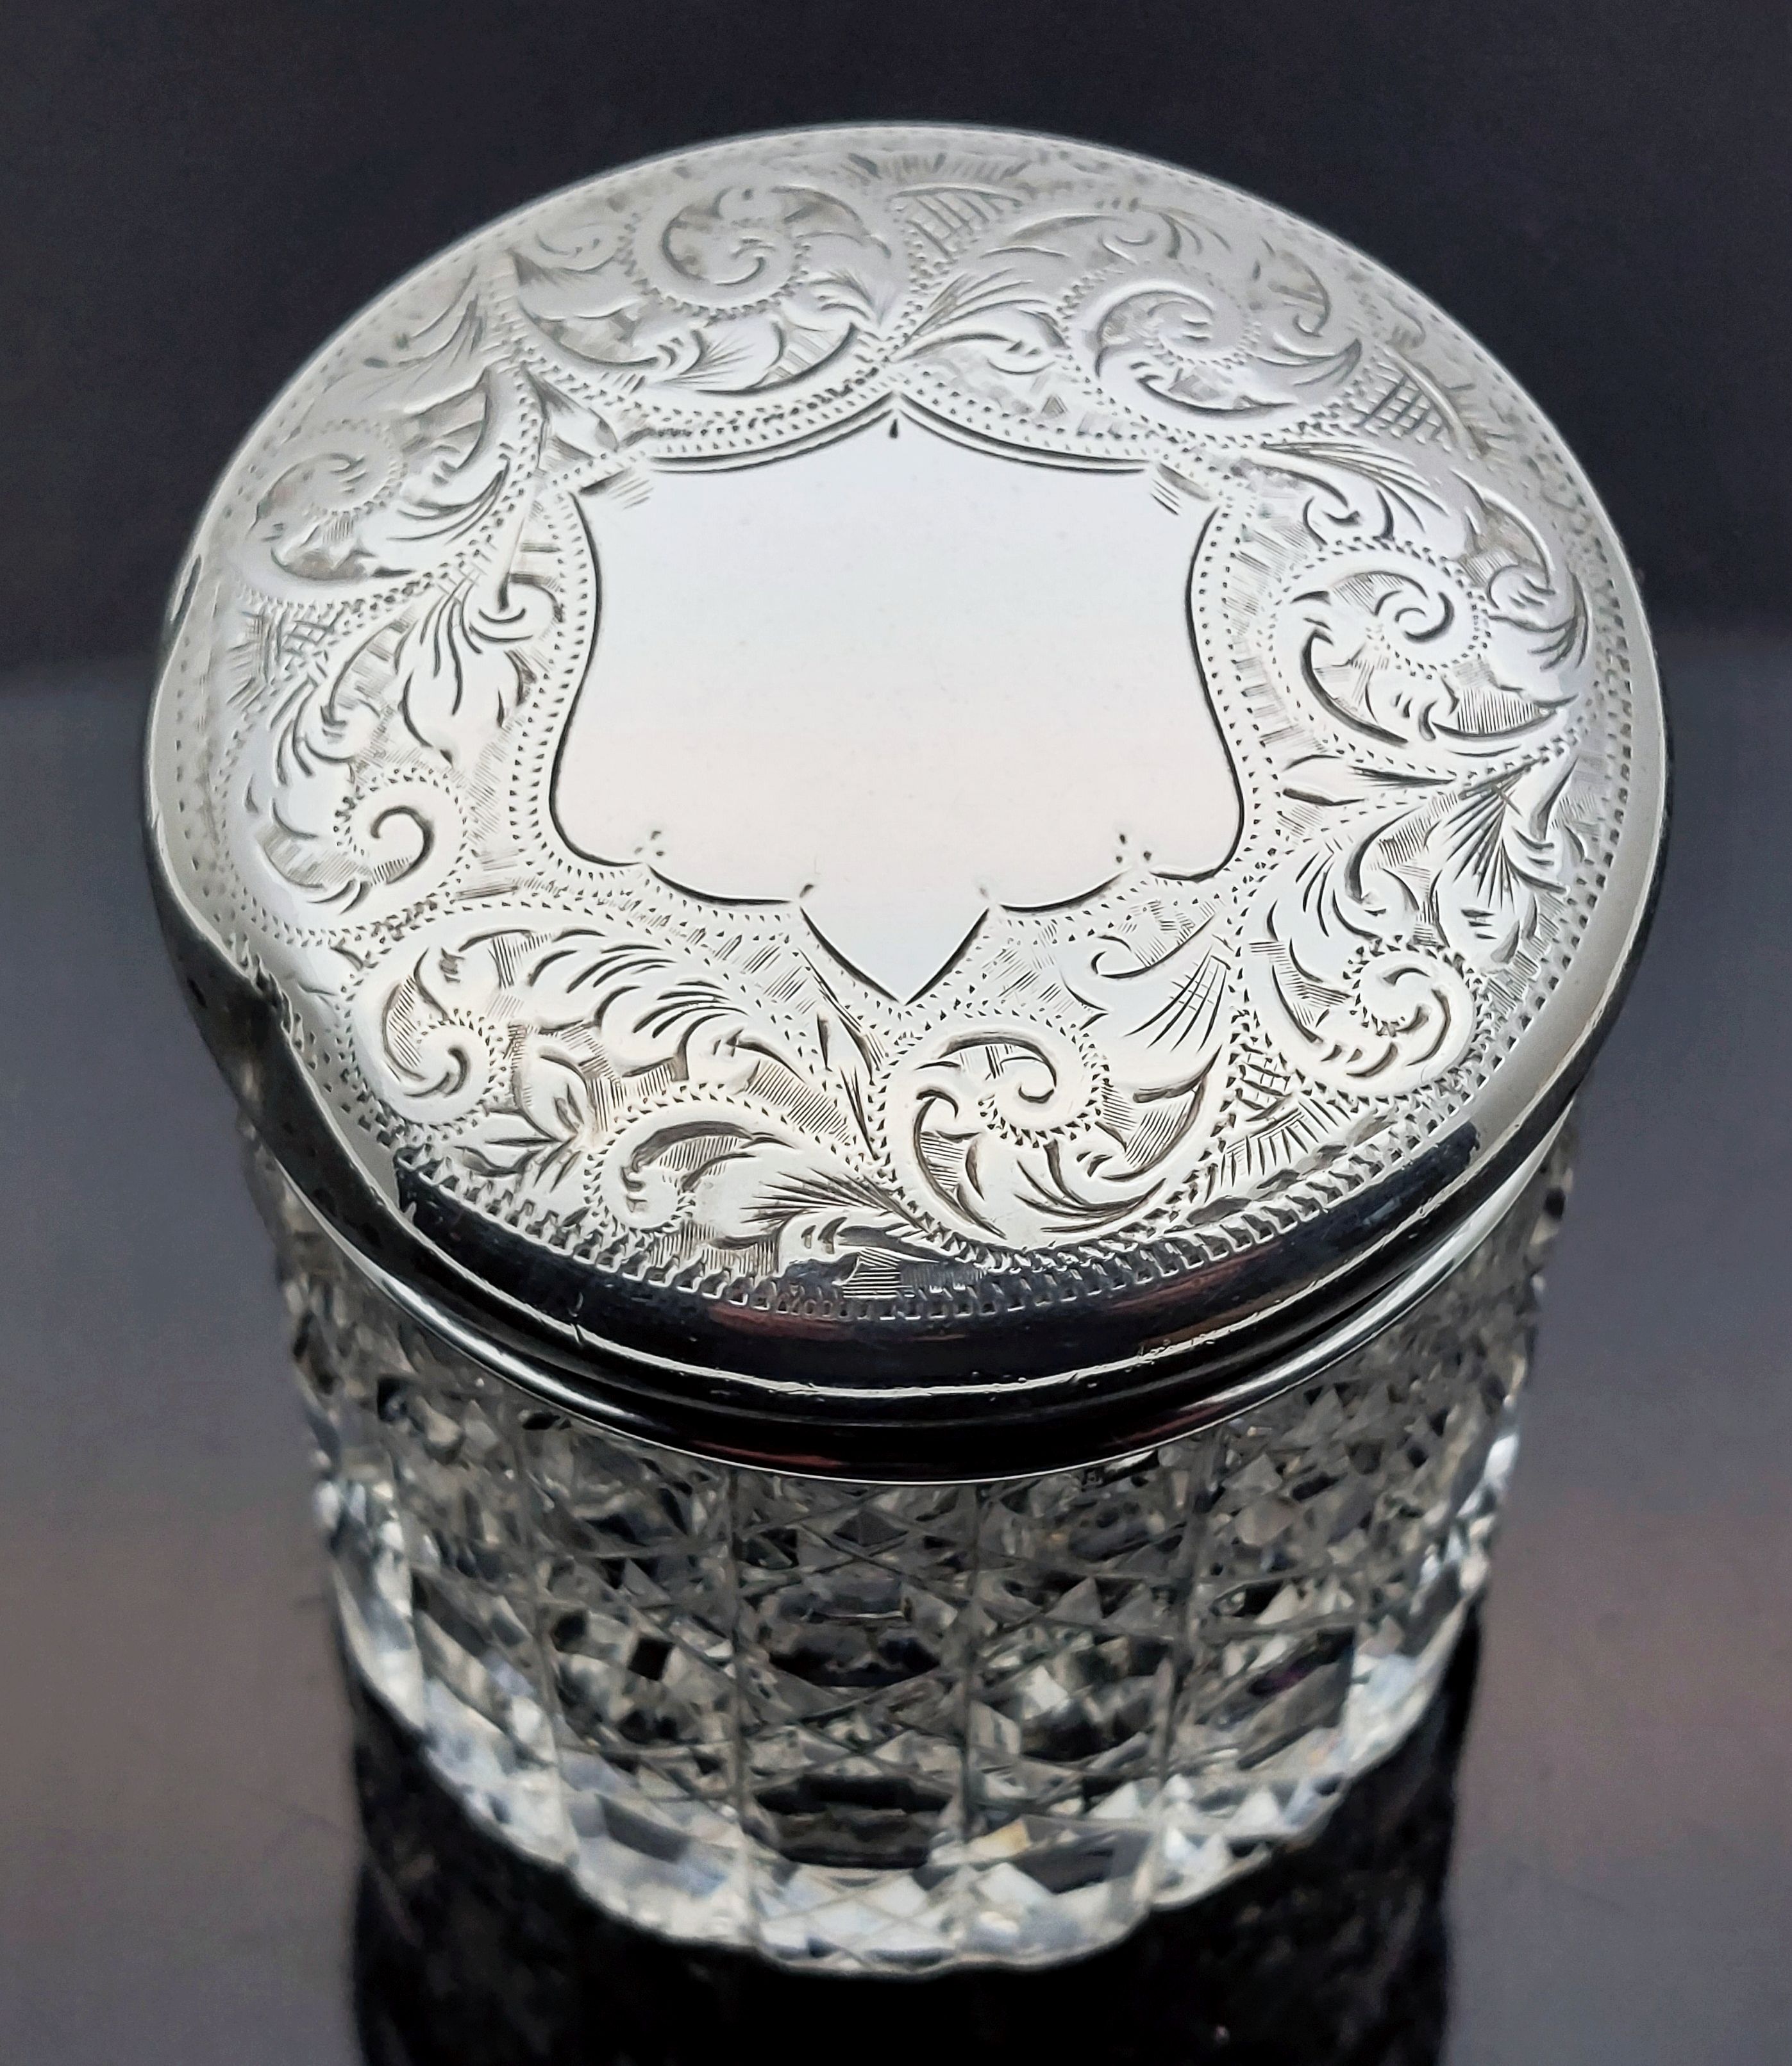 ORNATE STERLING SILVER VANITY JAR HOBNAIL CUT GLASS 1903 ANTIQUE |  Vintage-Kitsch Antique Silver, Cutlery & collectables